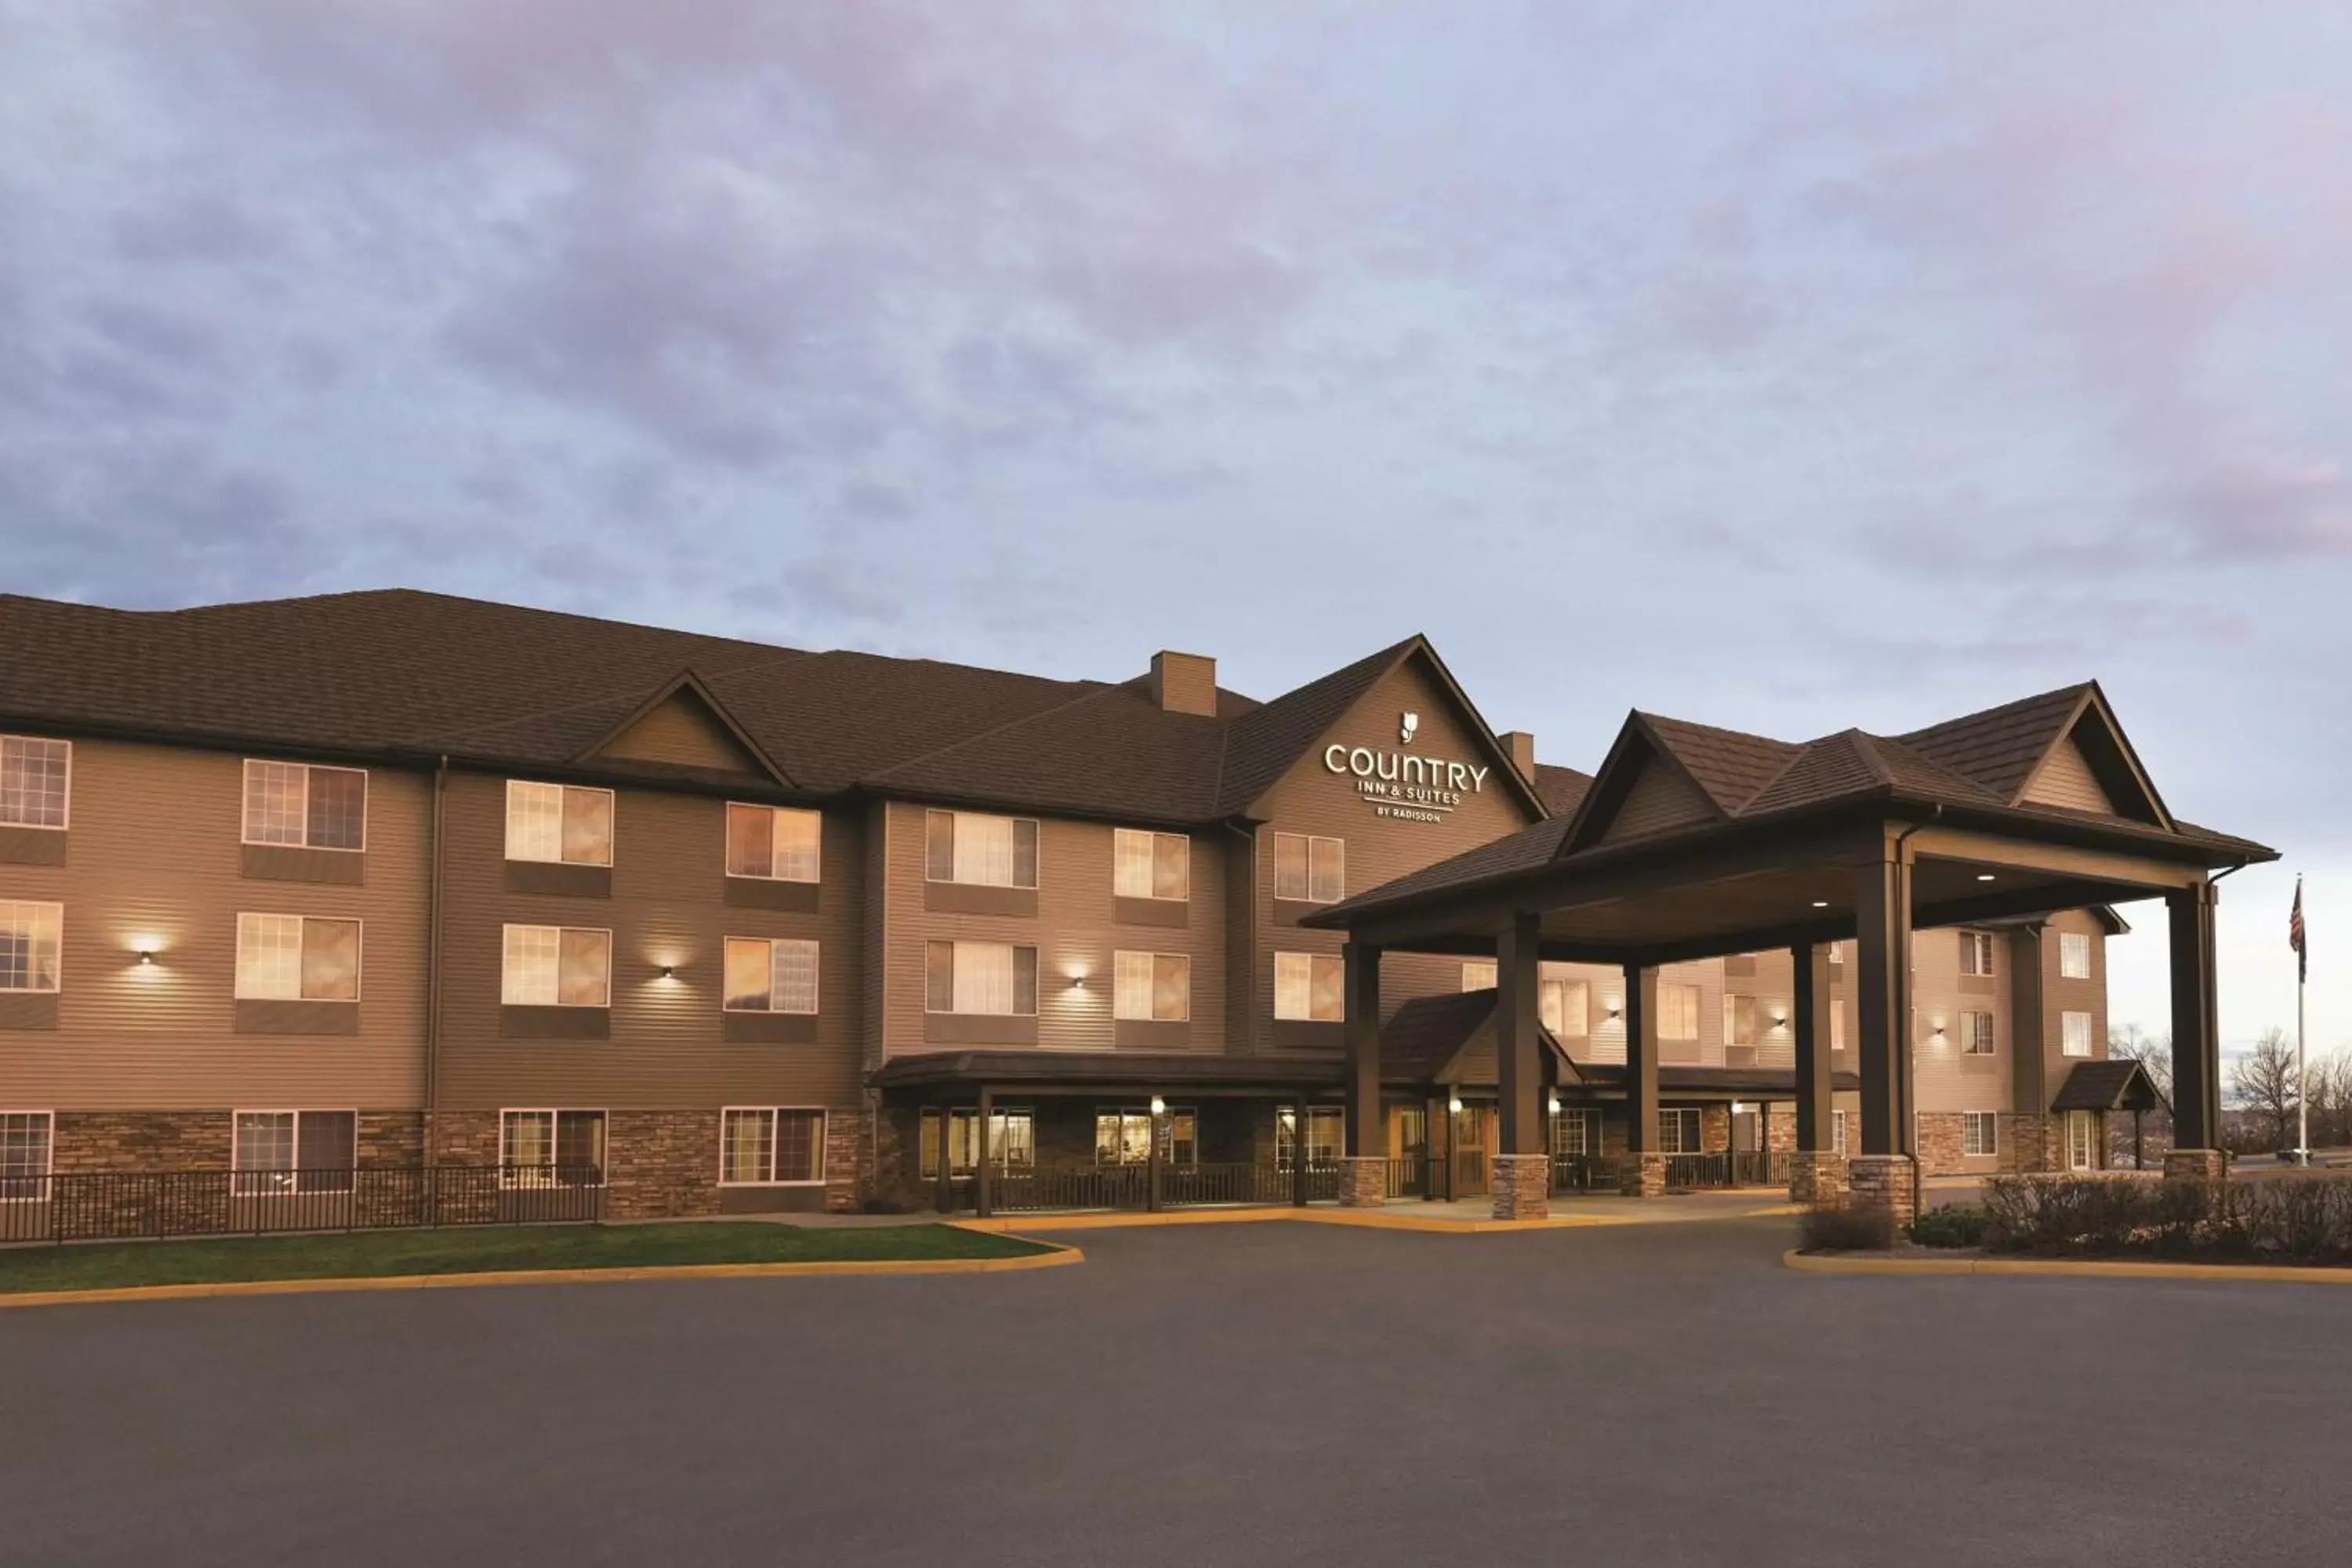 Property building in Country Inn & Suites by Radisson, Billings, MT